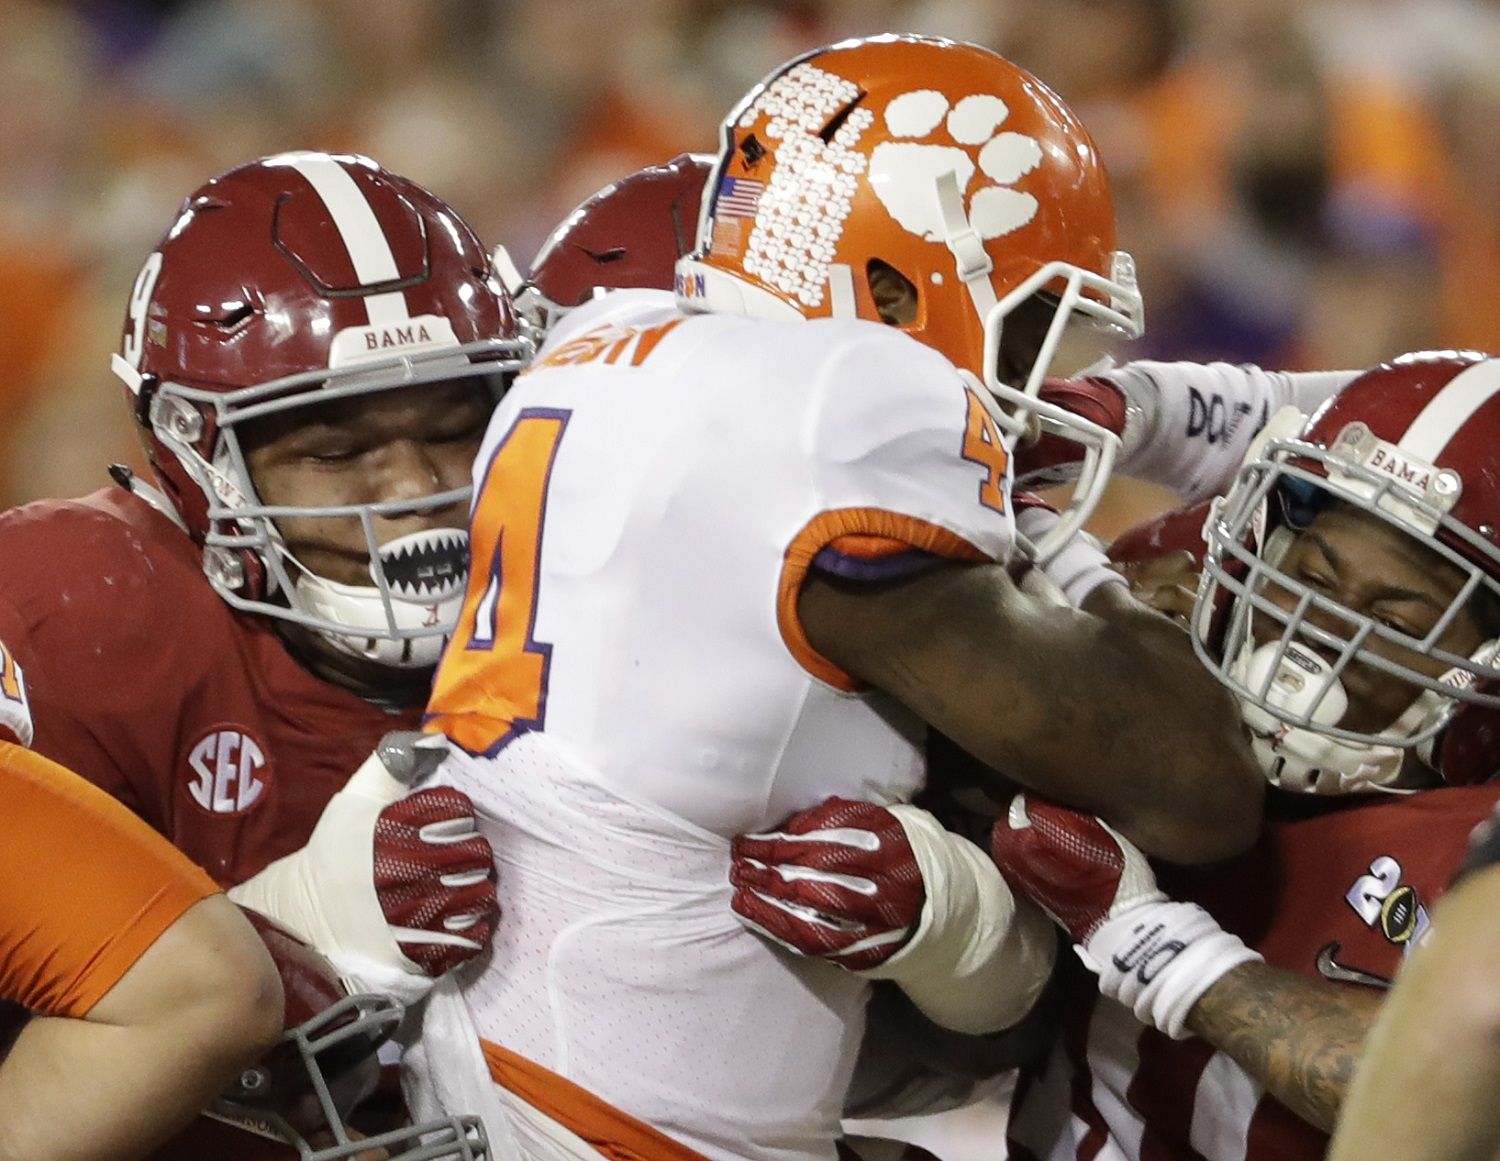 Clemson's Deshaun Watson is stopped on a third down run during the first half of the NCAA college football playoff championship game against Alabama Monday, Jan. 9, 2017, in Tampa, Fla. (AP Photo/David J. Phillip)